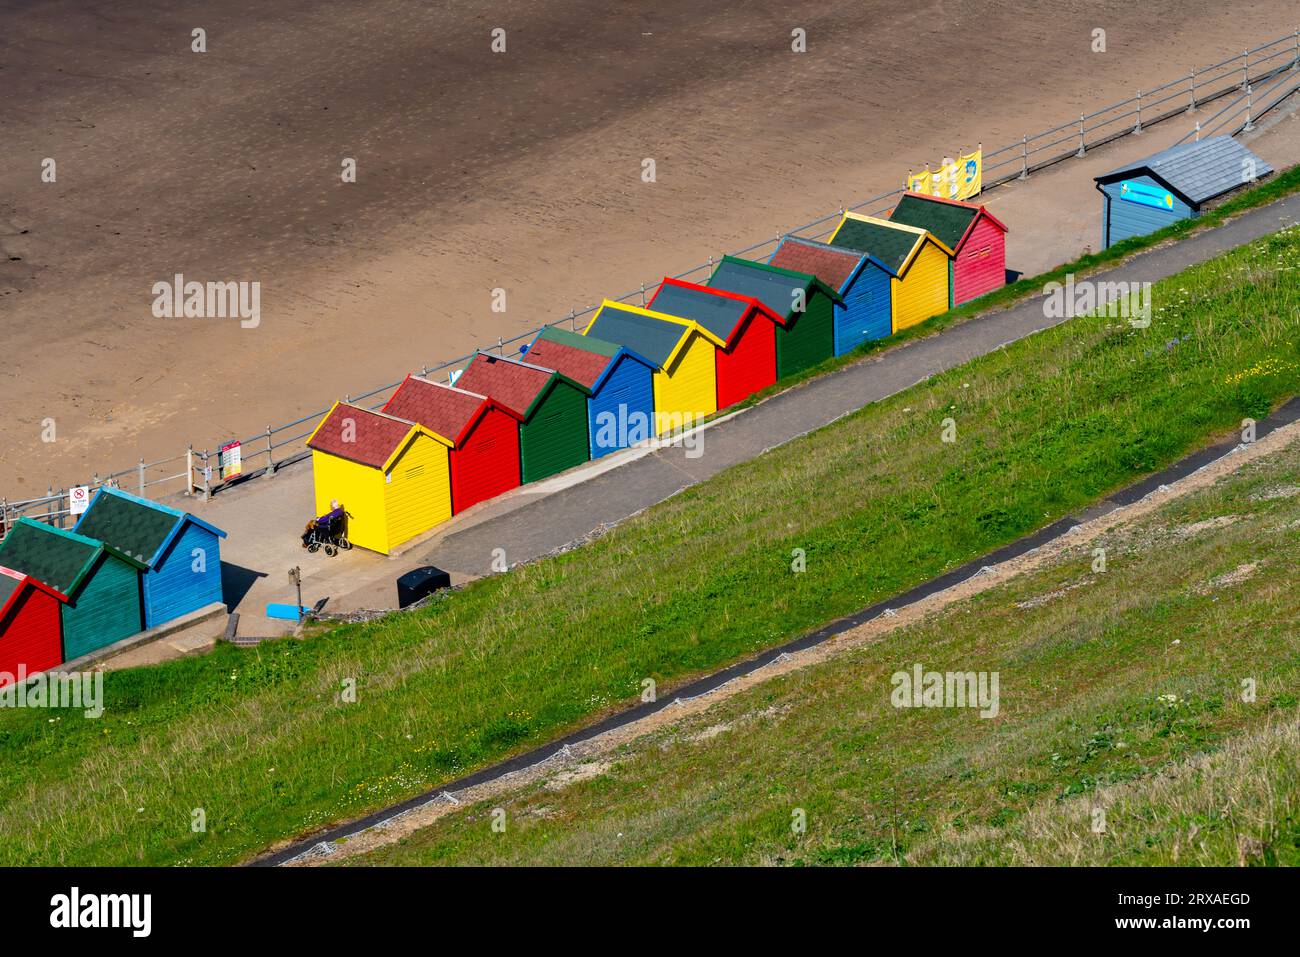 Seaside Towns and beaches in the UK Stock Photo